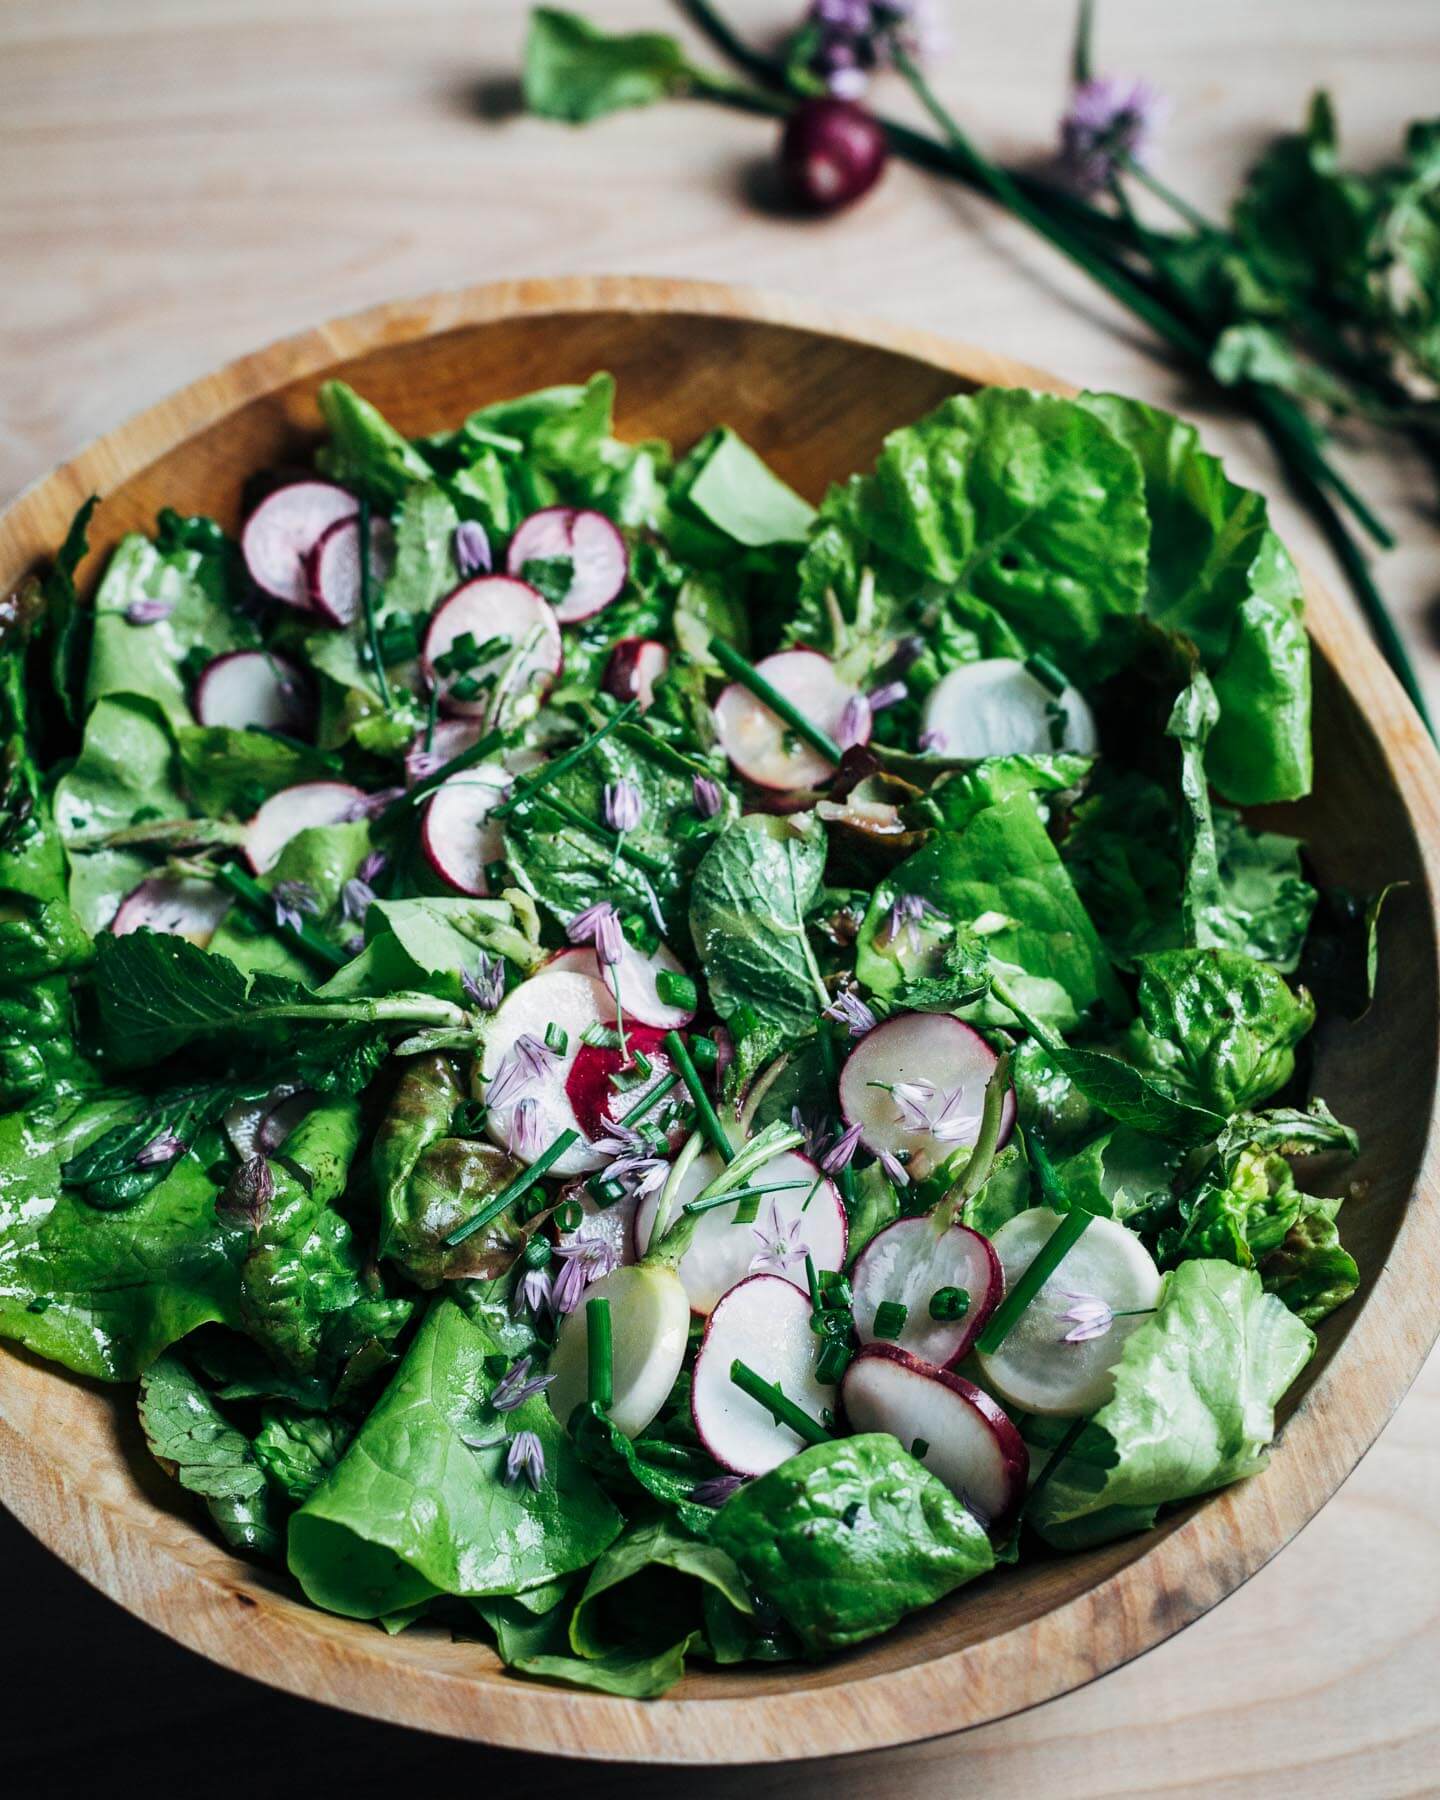 A simple salad of delicate lettuces, jewel-toned radishes, and chives topped with a perfectly balanced, classic vinaigrette.